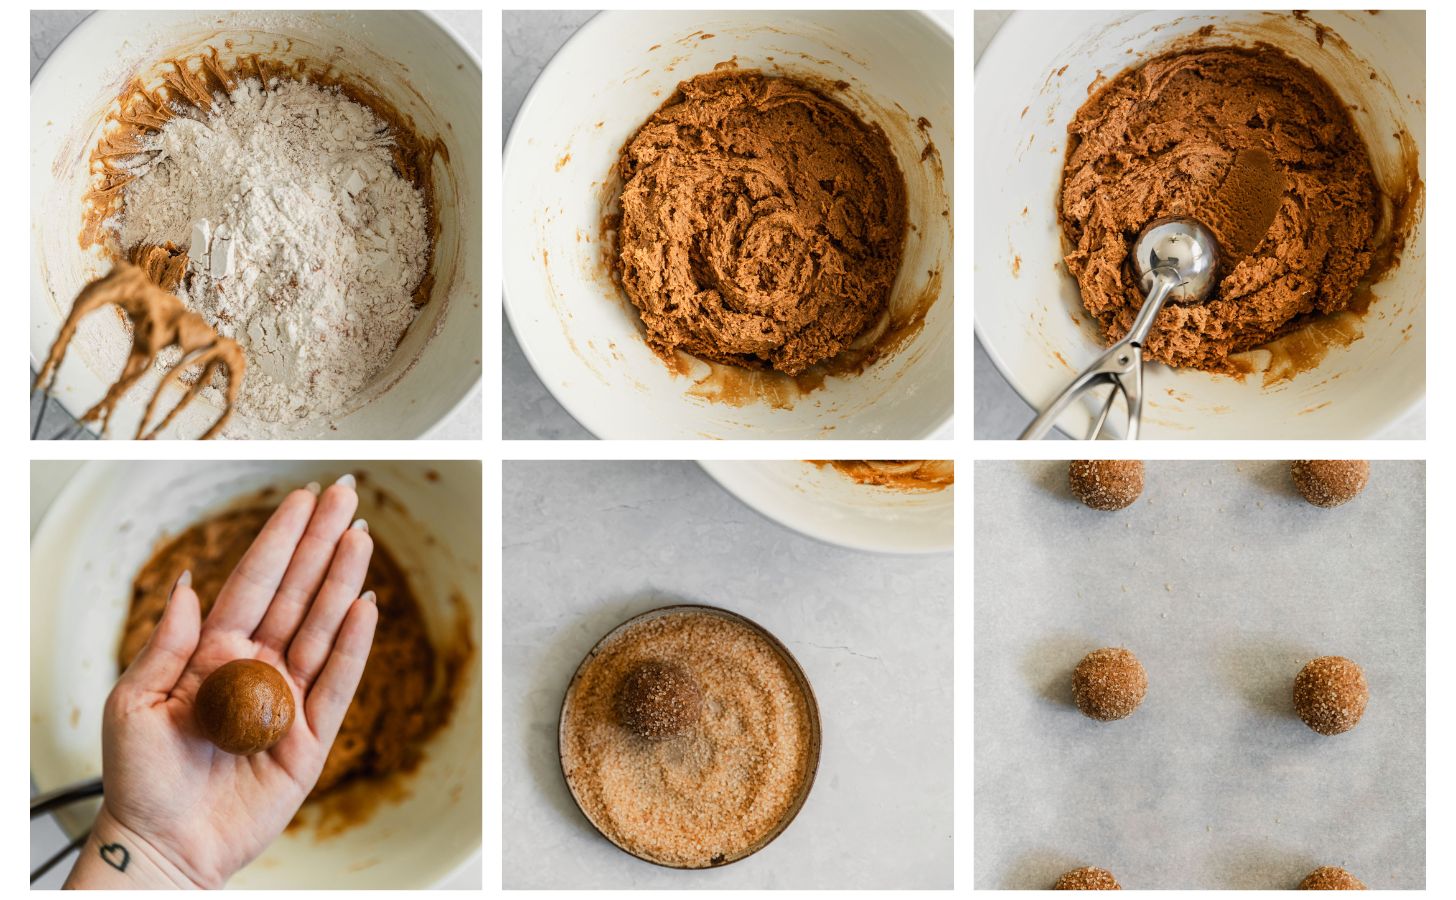 Six steps to making molasses crinkle cookies. In photo 1, a white bowl of cookie dough has flour in it. In photo 2, the dough is mixed. In photo 3, a scoop is scooping the dough. In photo 4, a hand is rolling the dough. In photo 5, the cookie dough ball is being rolled in raw sugar. In photo 6, the cookie dough balls are placed on parchment paper.